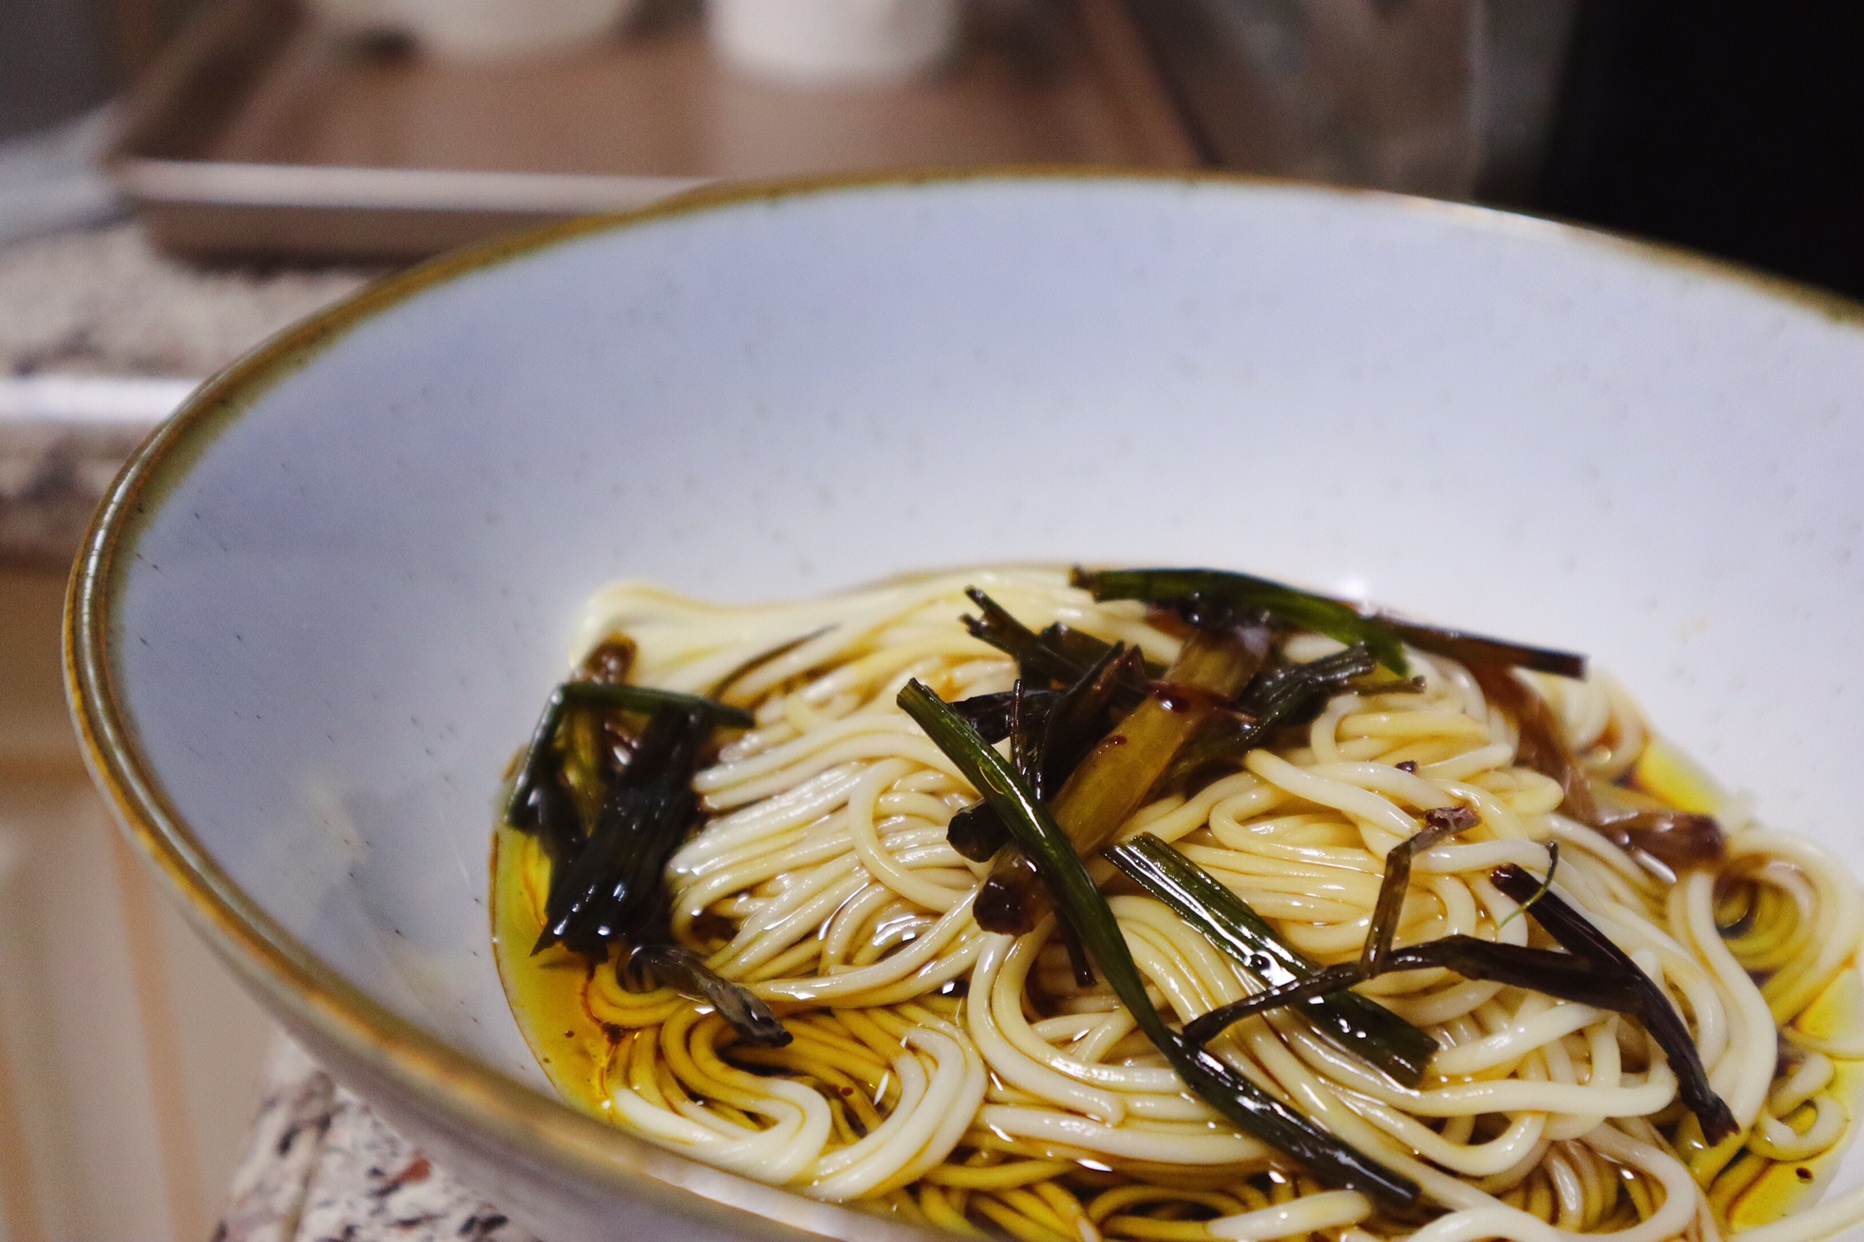 
Pity Chen? The practice of green oily noodles served with soy sauce, how to do delicious